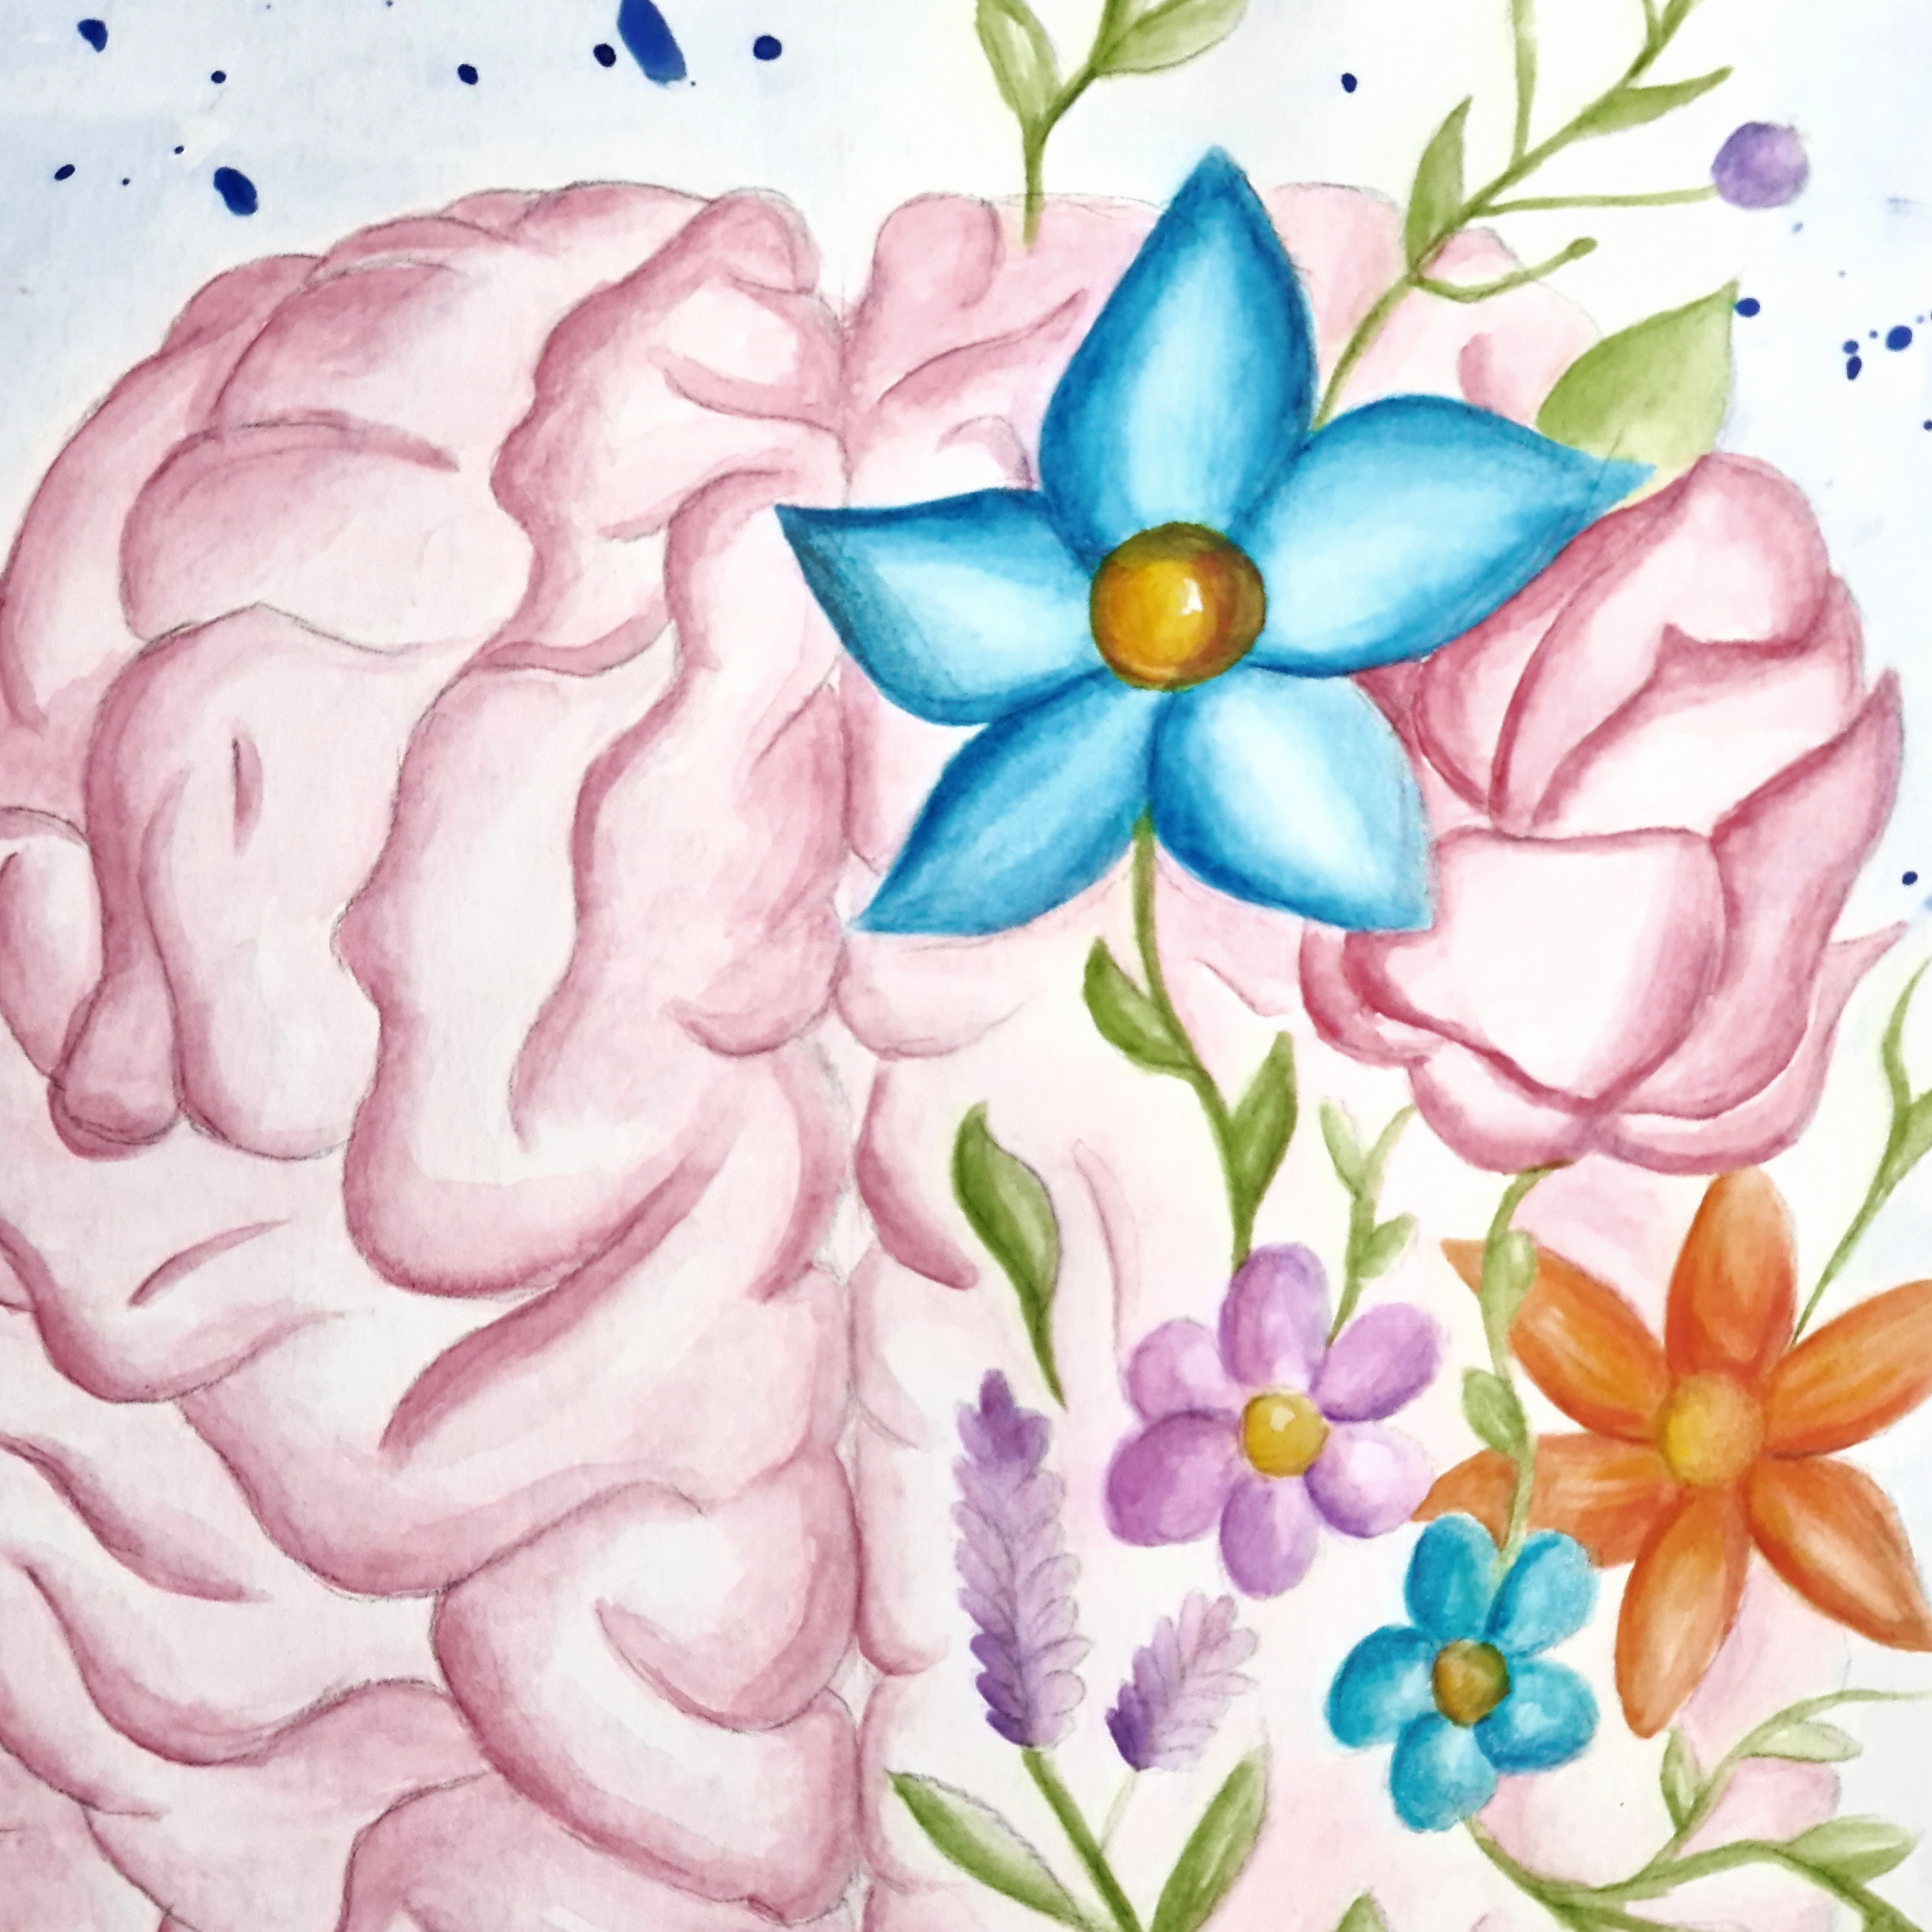 Close up of a watercolour print by Clarrie-Anne on eco fine art paper titled Mindfulness showing a brain with flowers surrounding it.